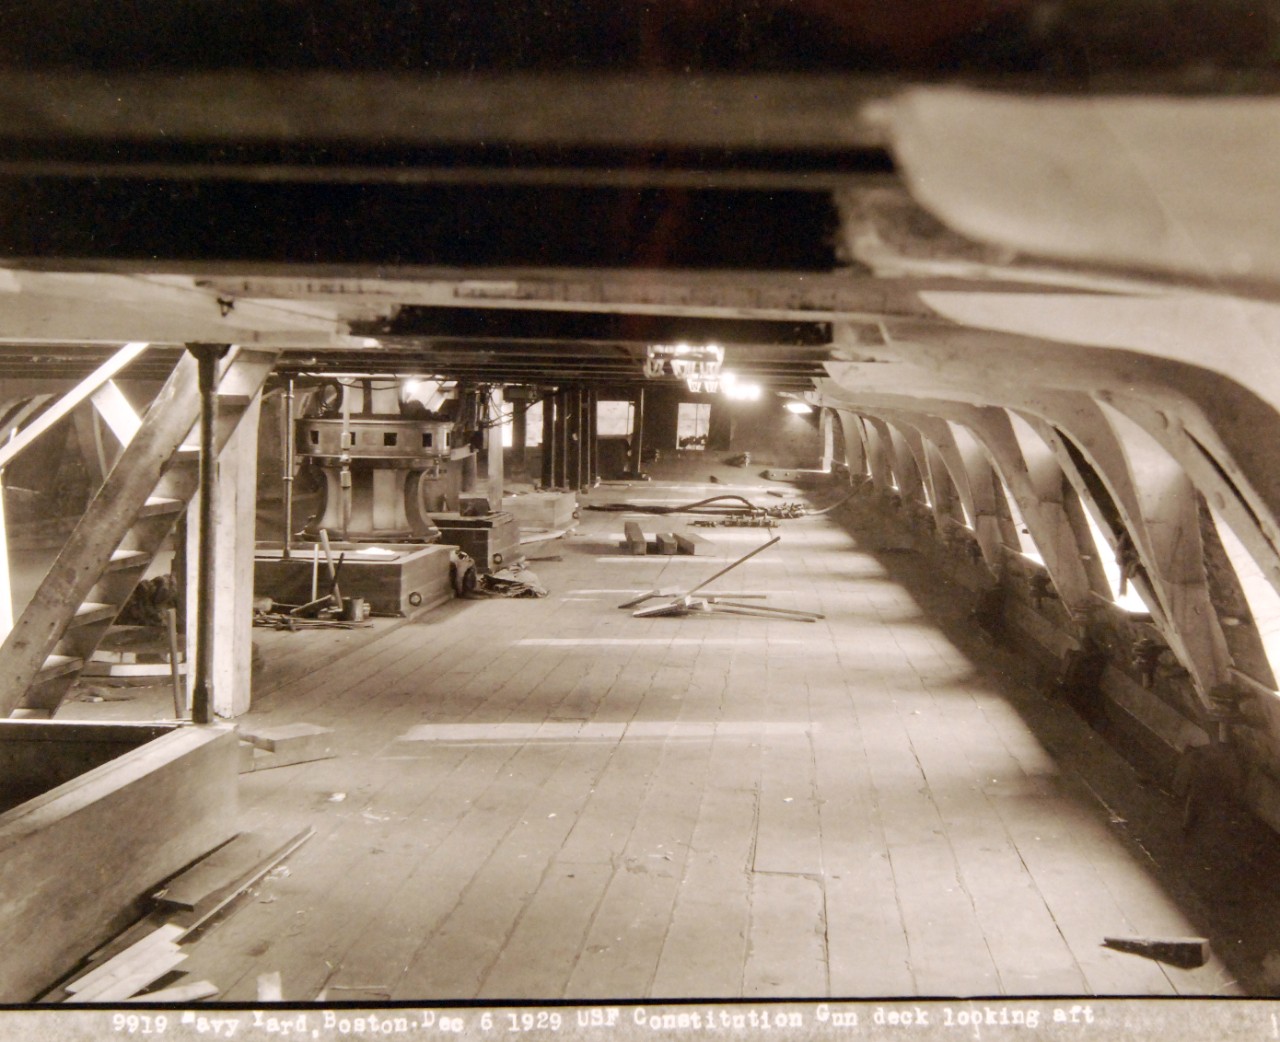 80-G-424960:  USS Constitution, 1929.    Constitution being restored at Boston Navy Yard, Massachusetts.   Shown:  Gun deck, looking forward.      Photograph December 1929.   Official U.S. Navy Photograph, now in the collections of the National Archives.   (2017/08/01).  